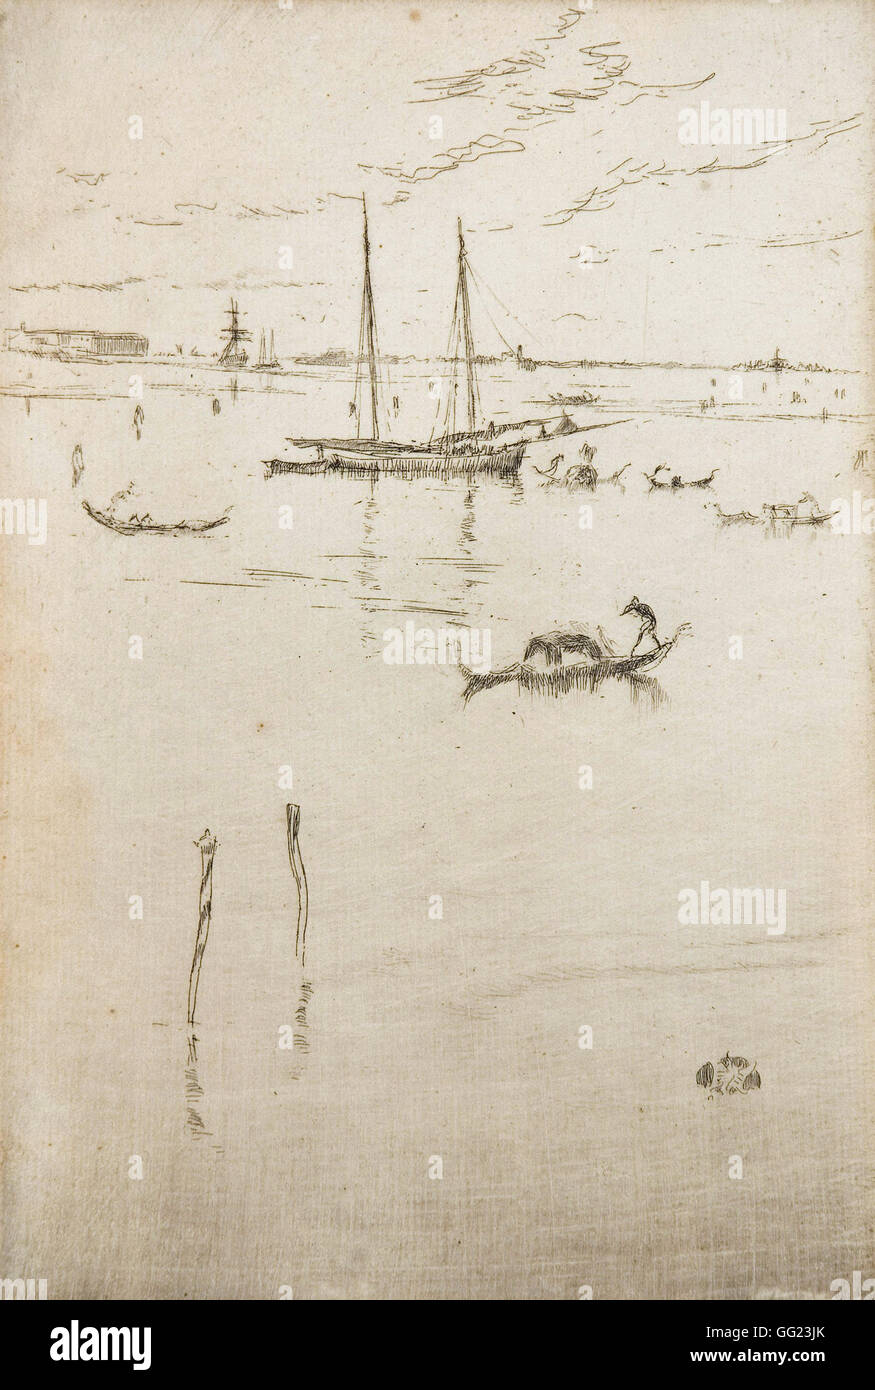 James Abbott McNeill Whistler - The Little Lagoon, from the Twelve Etchings Stock Photo